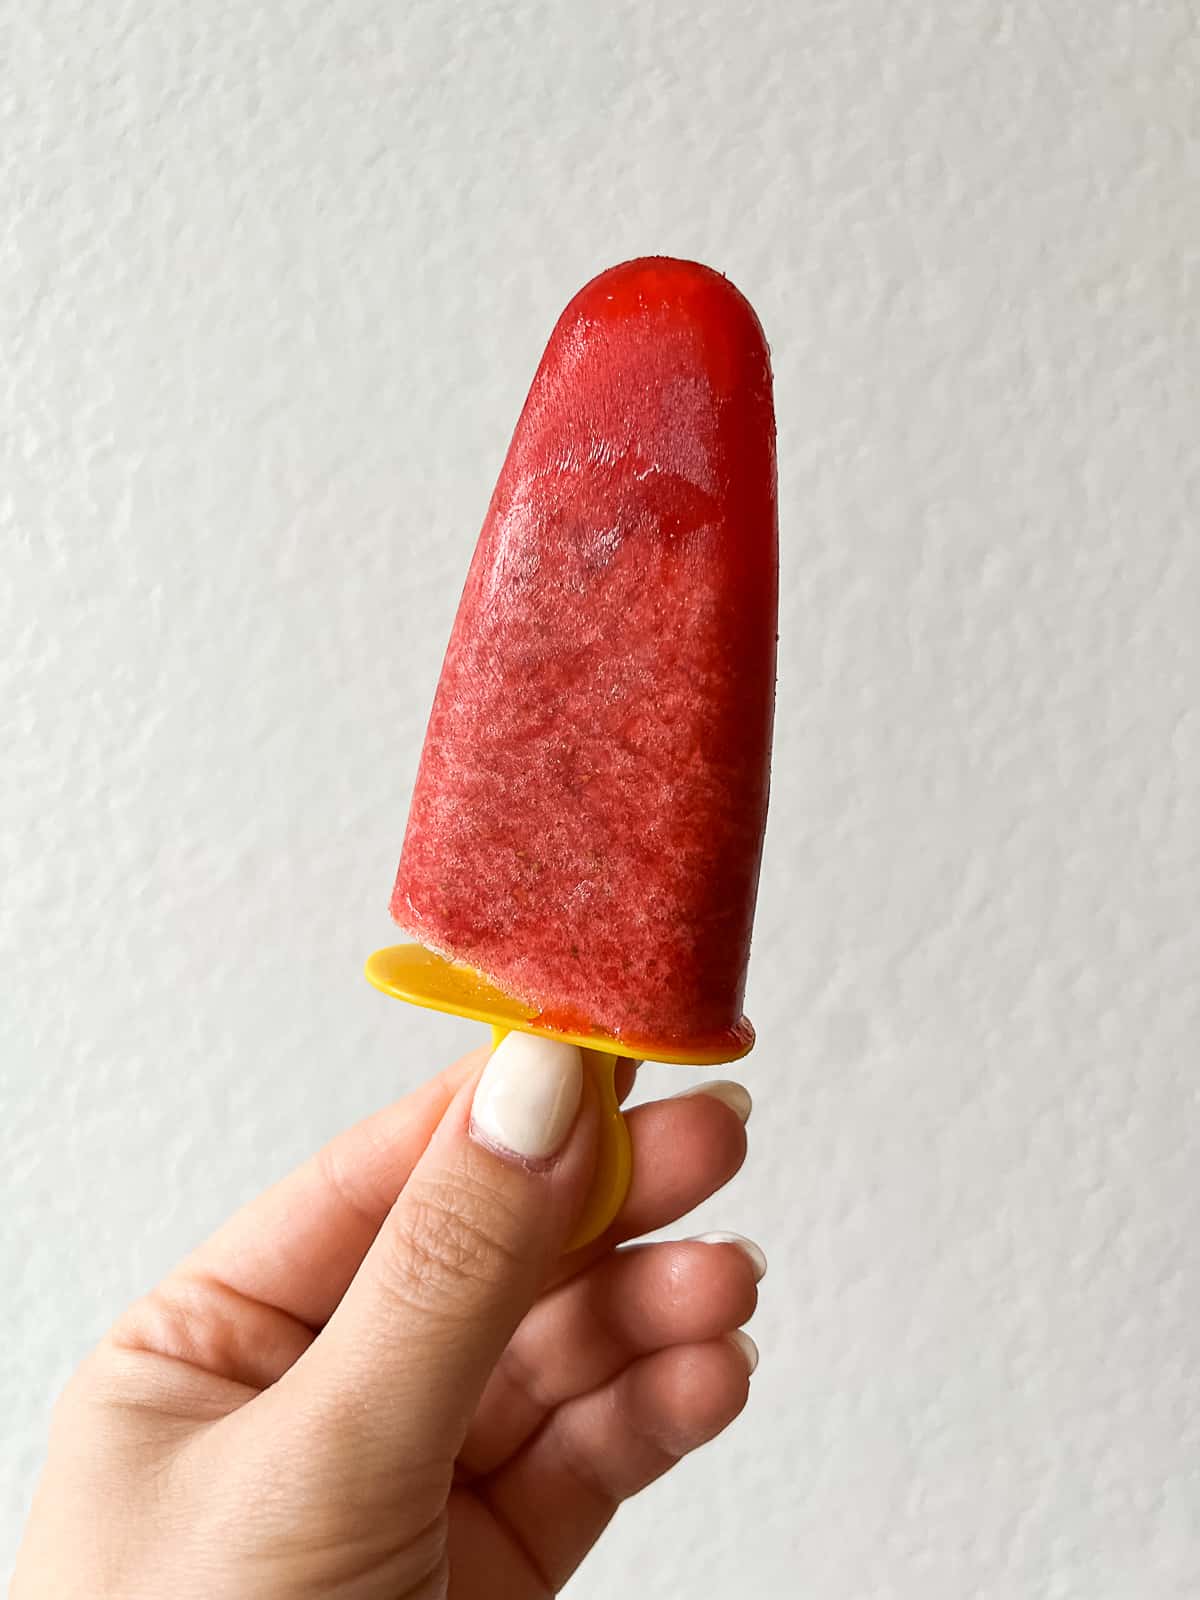 Holding a homemade popsicle on Ikea popsicle mold stick 